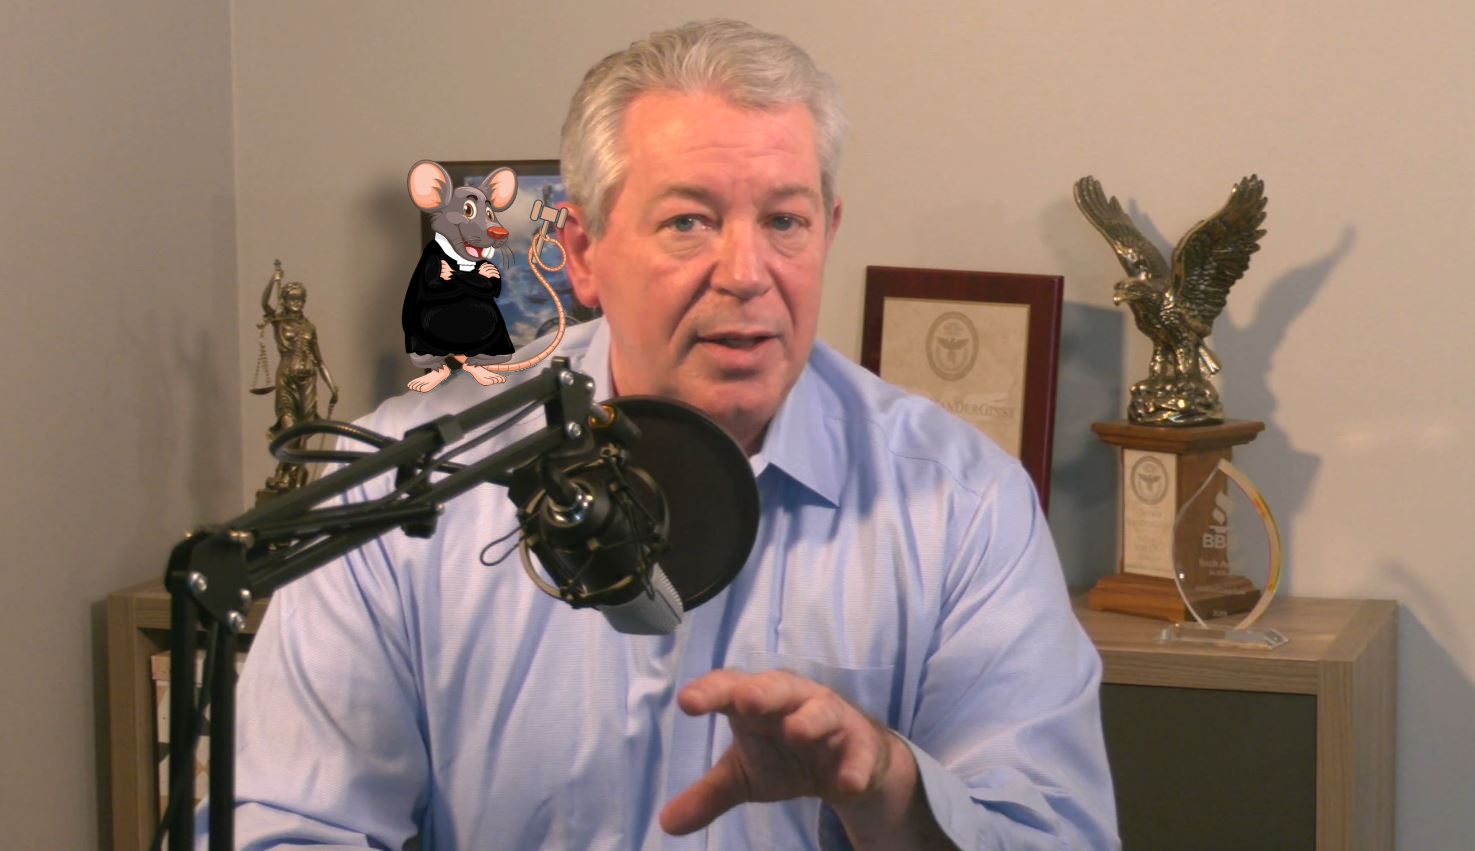 Dennis with Legal Squeaks Mouse Mascot on his Shoulder